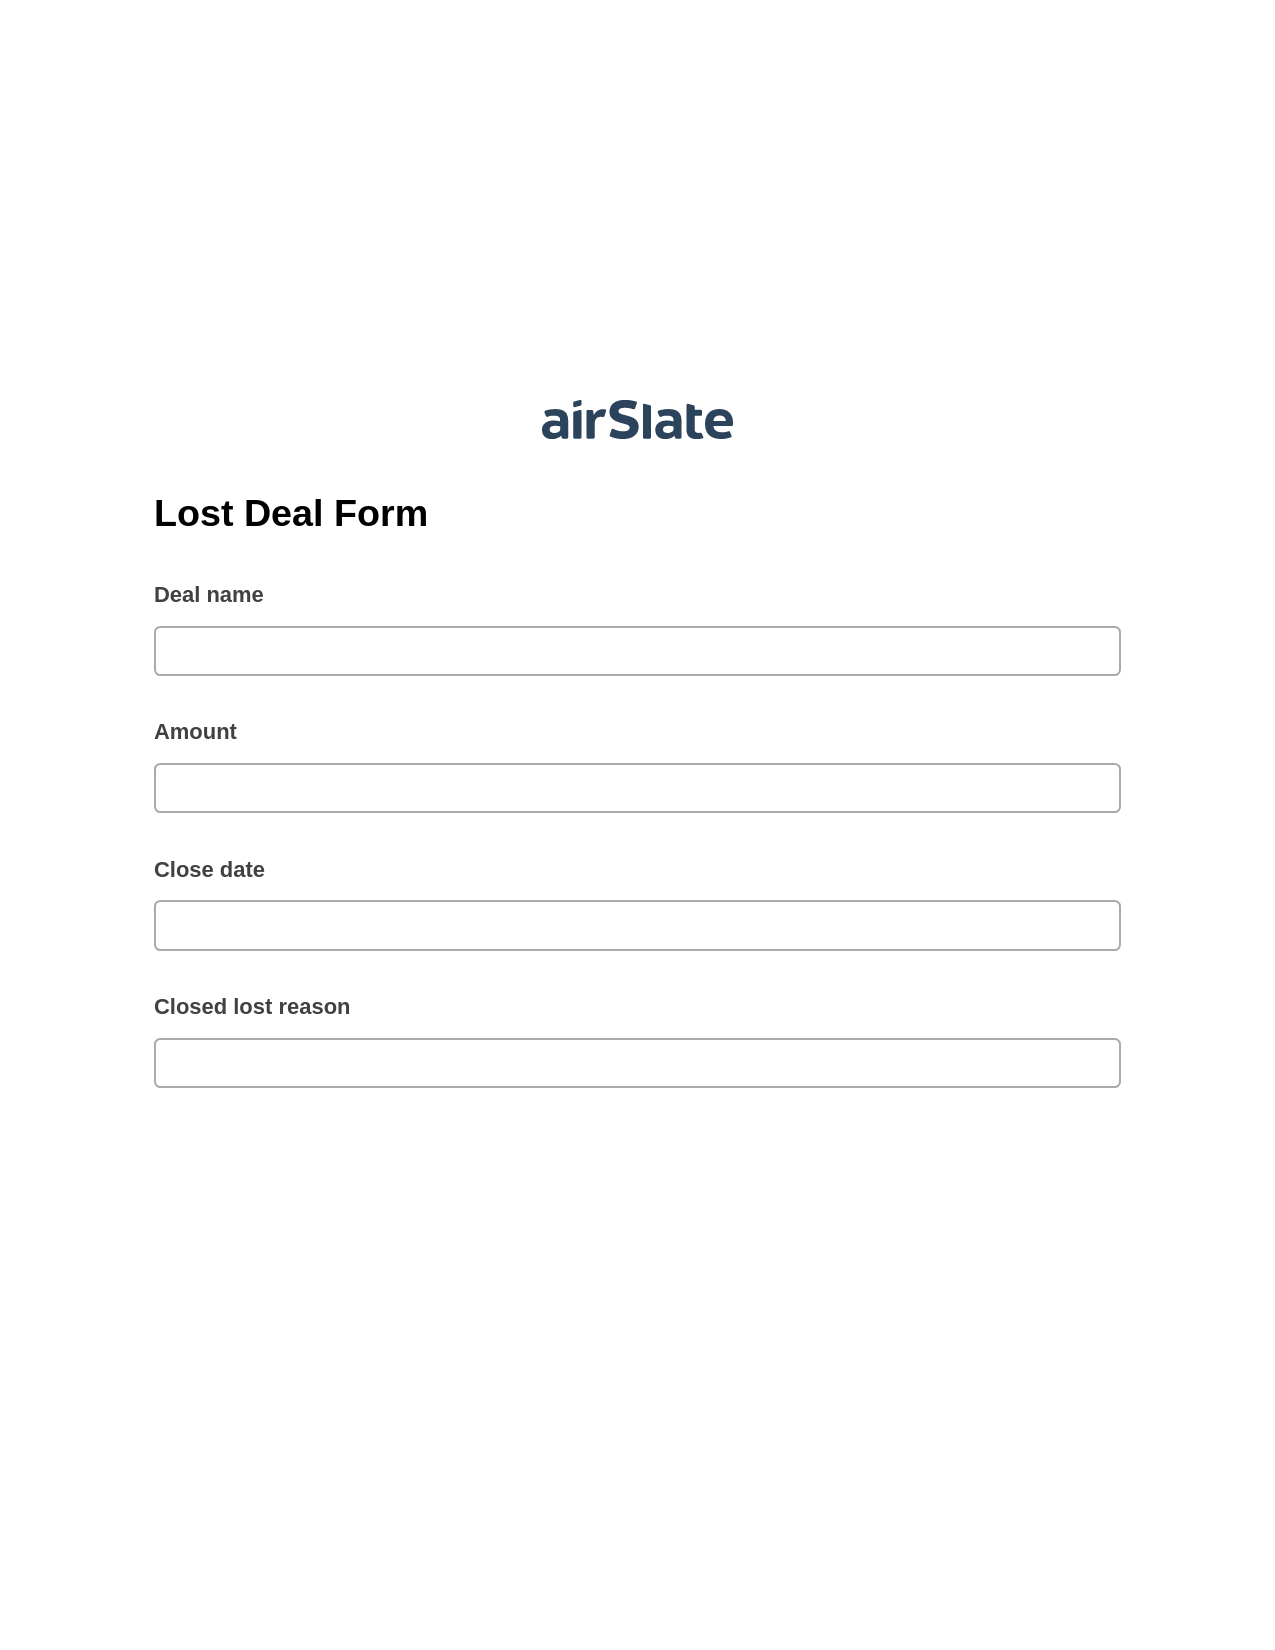 Lost Deal Form Pre-fill from Salesforce Records Bot, Webhook Bot, Archive to Dropbox Bot